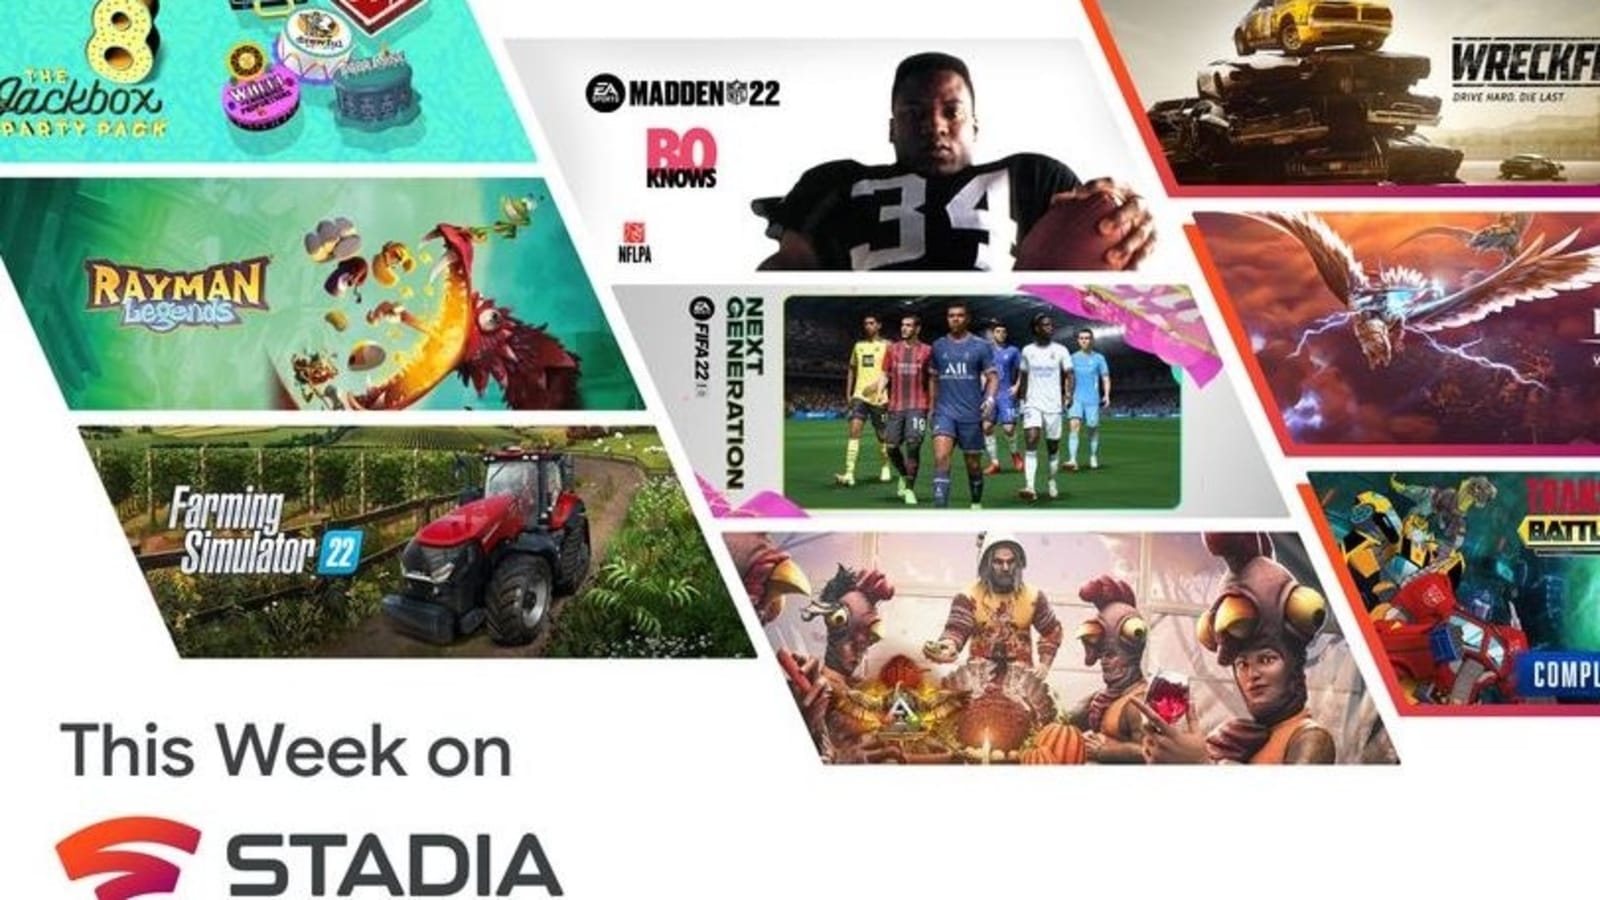 This Week on Stadia: 5 new Stadia Pro games coming March 1